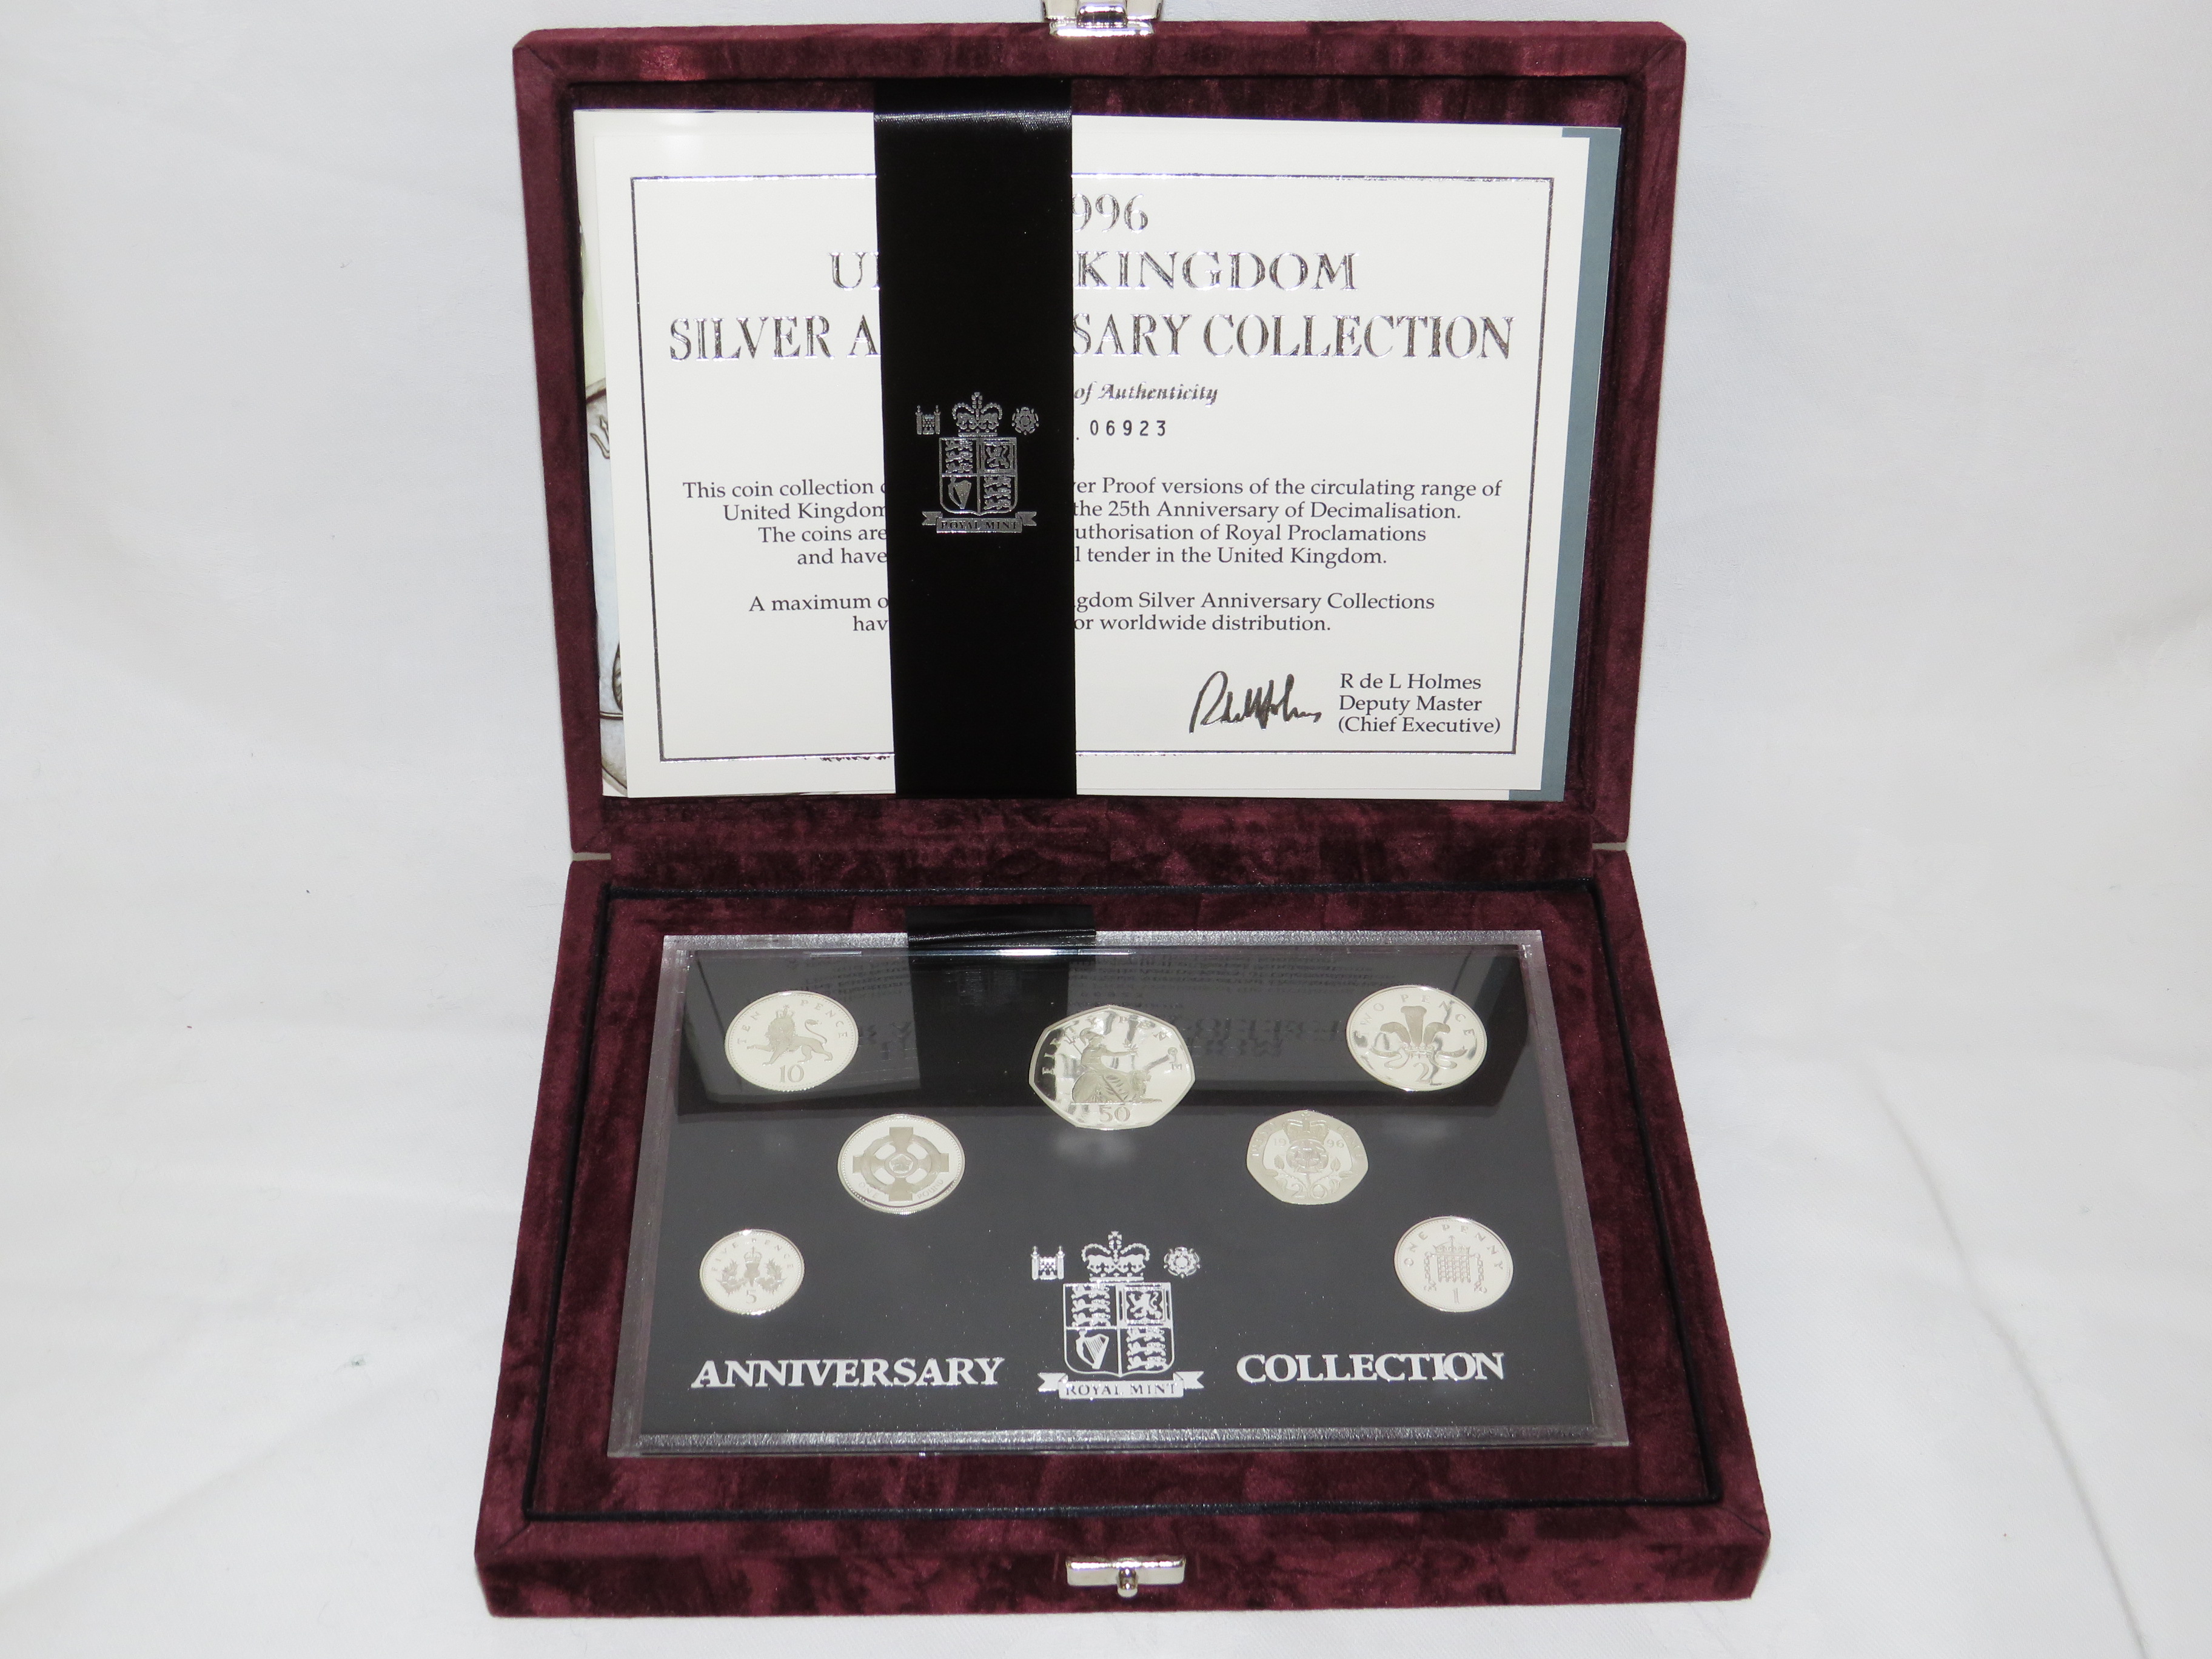 Royal Mint 1996 United Kingdom Silver Anniversary Collection containing silver Proof versions of the